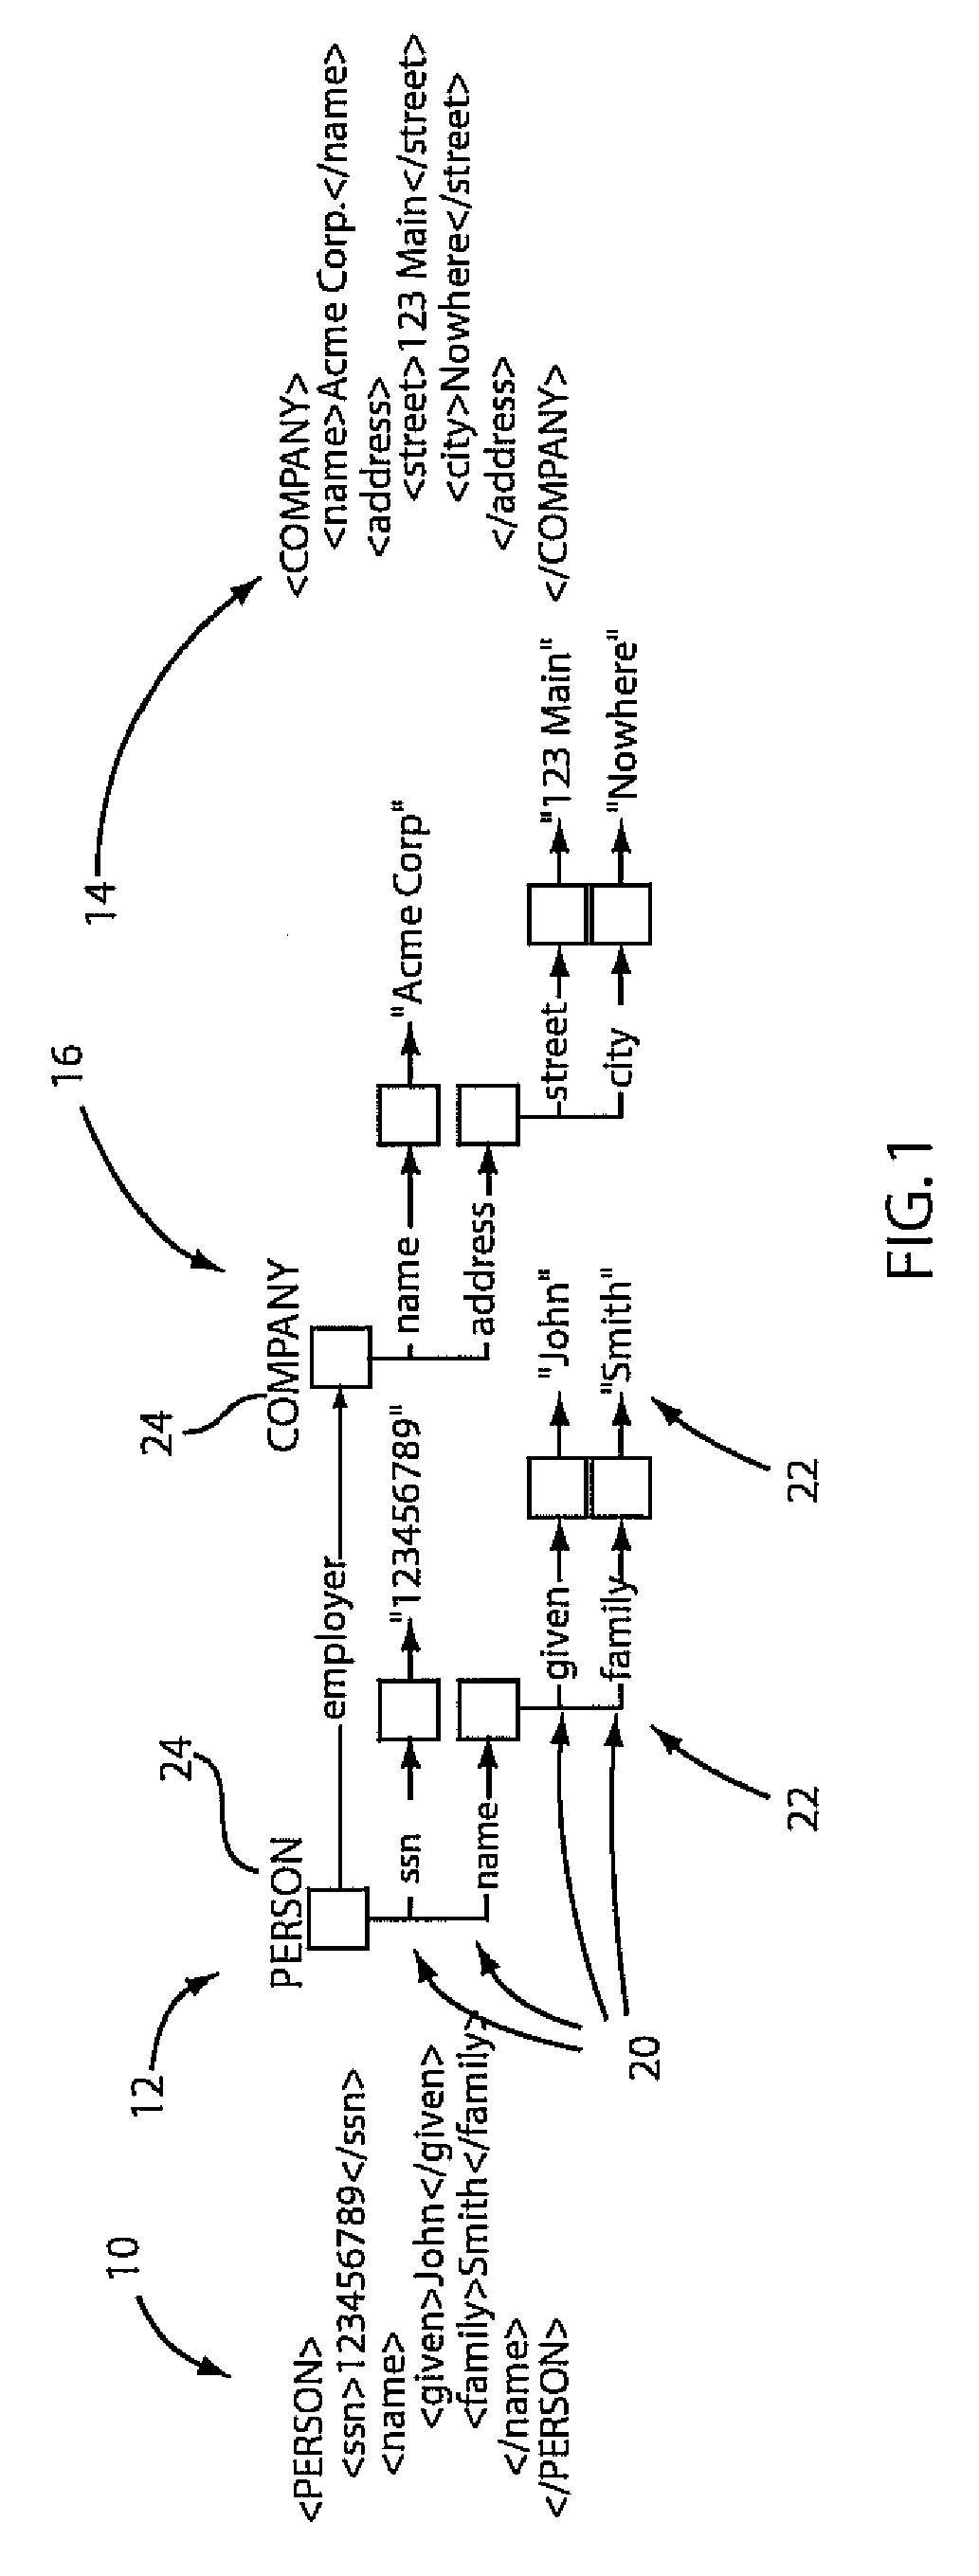 System and method for managing resources using a compositional programming model